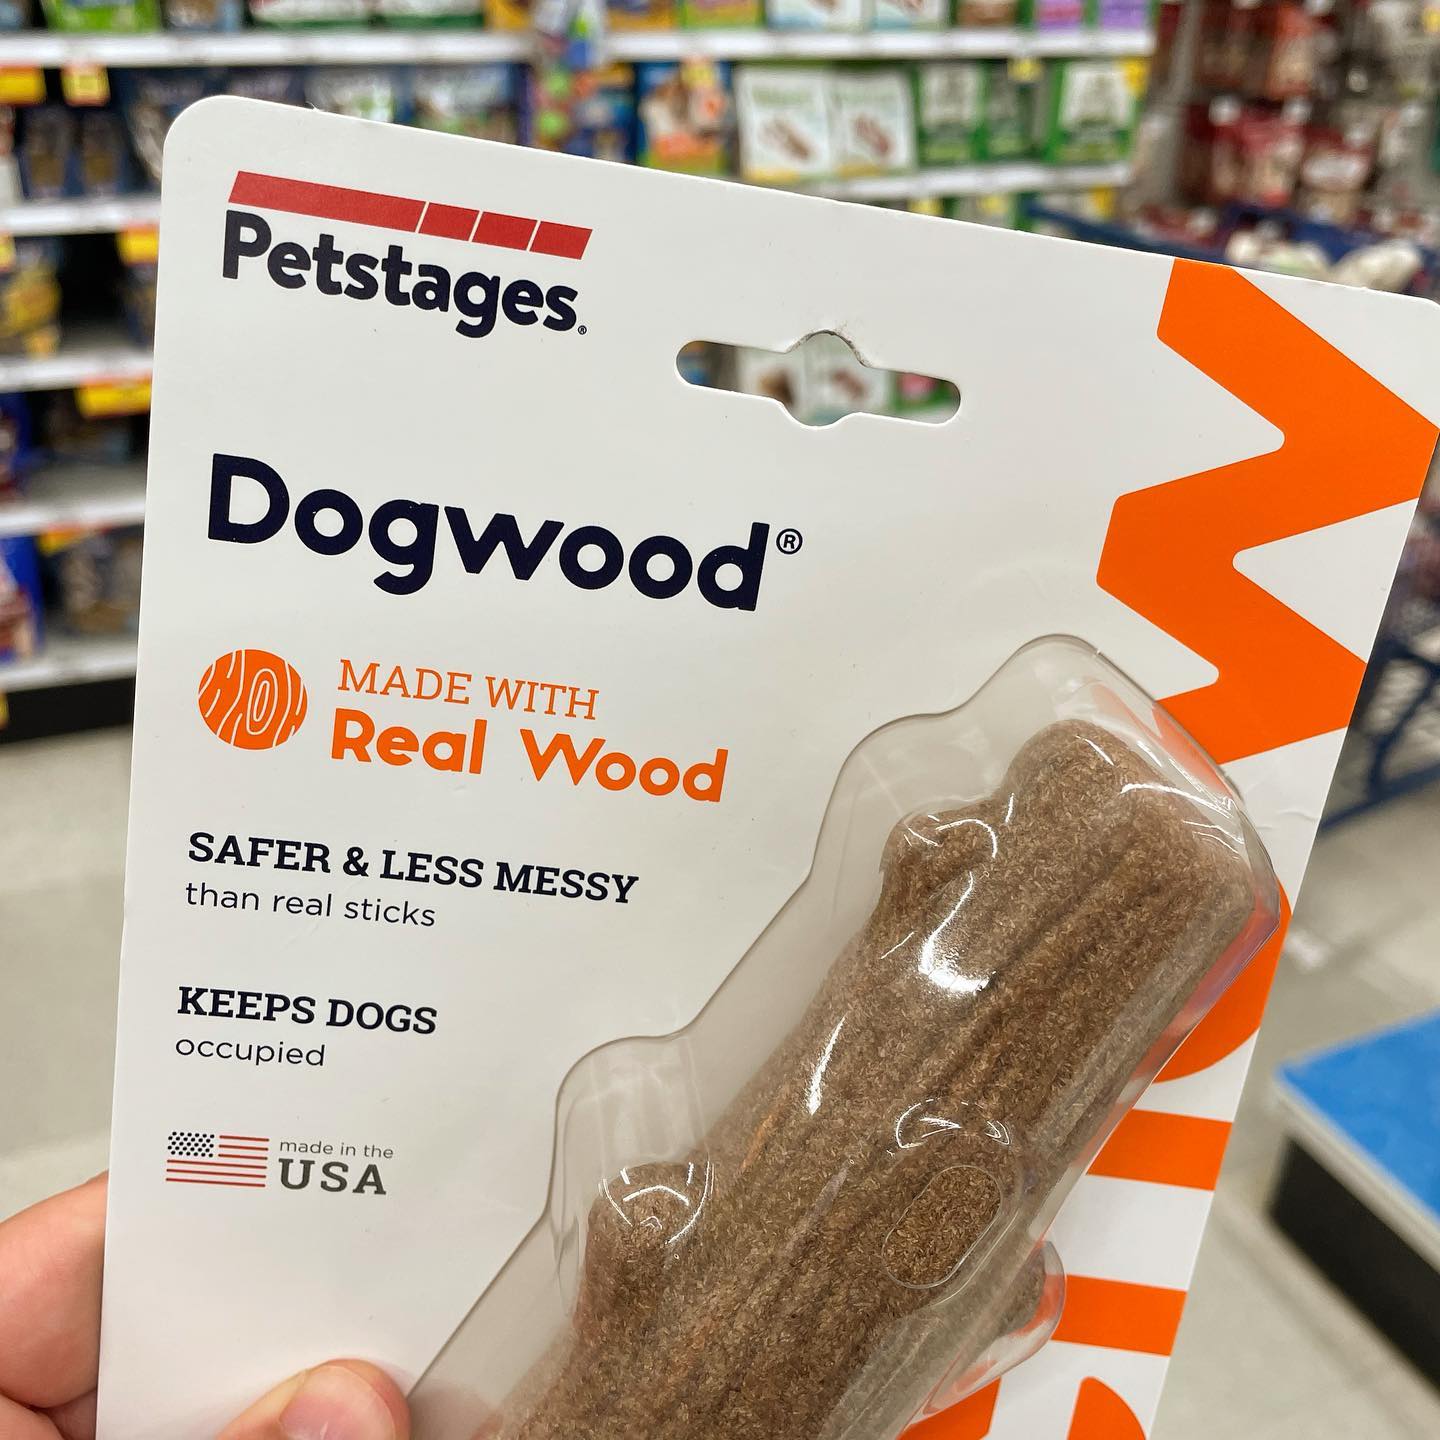 I used to have a Dogwood tree but it never produced dog treats. Must’ve had the wrong variety.